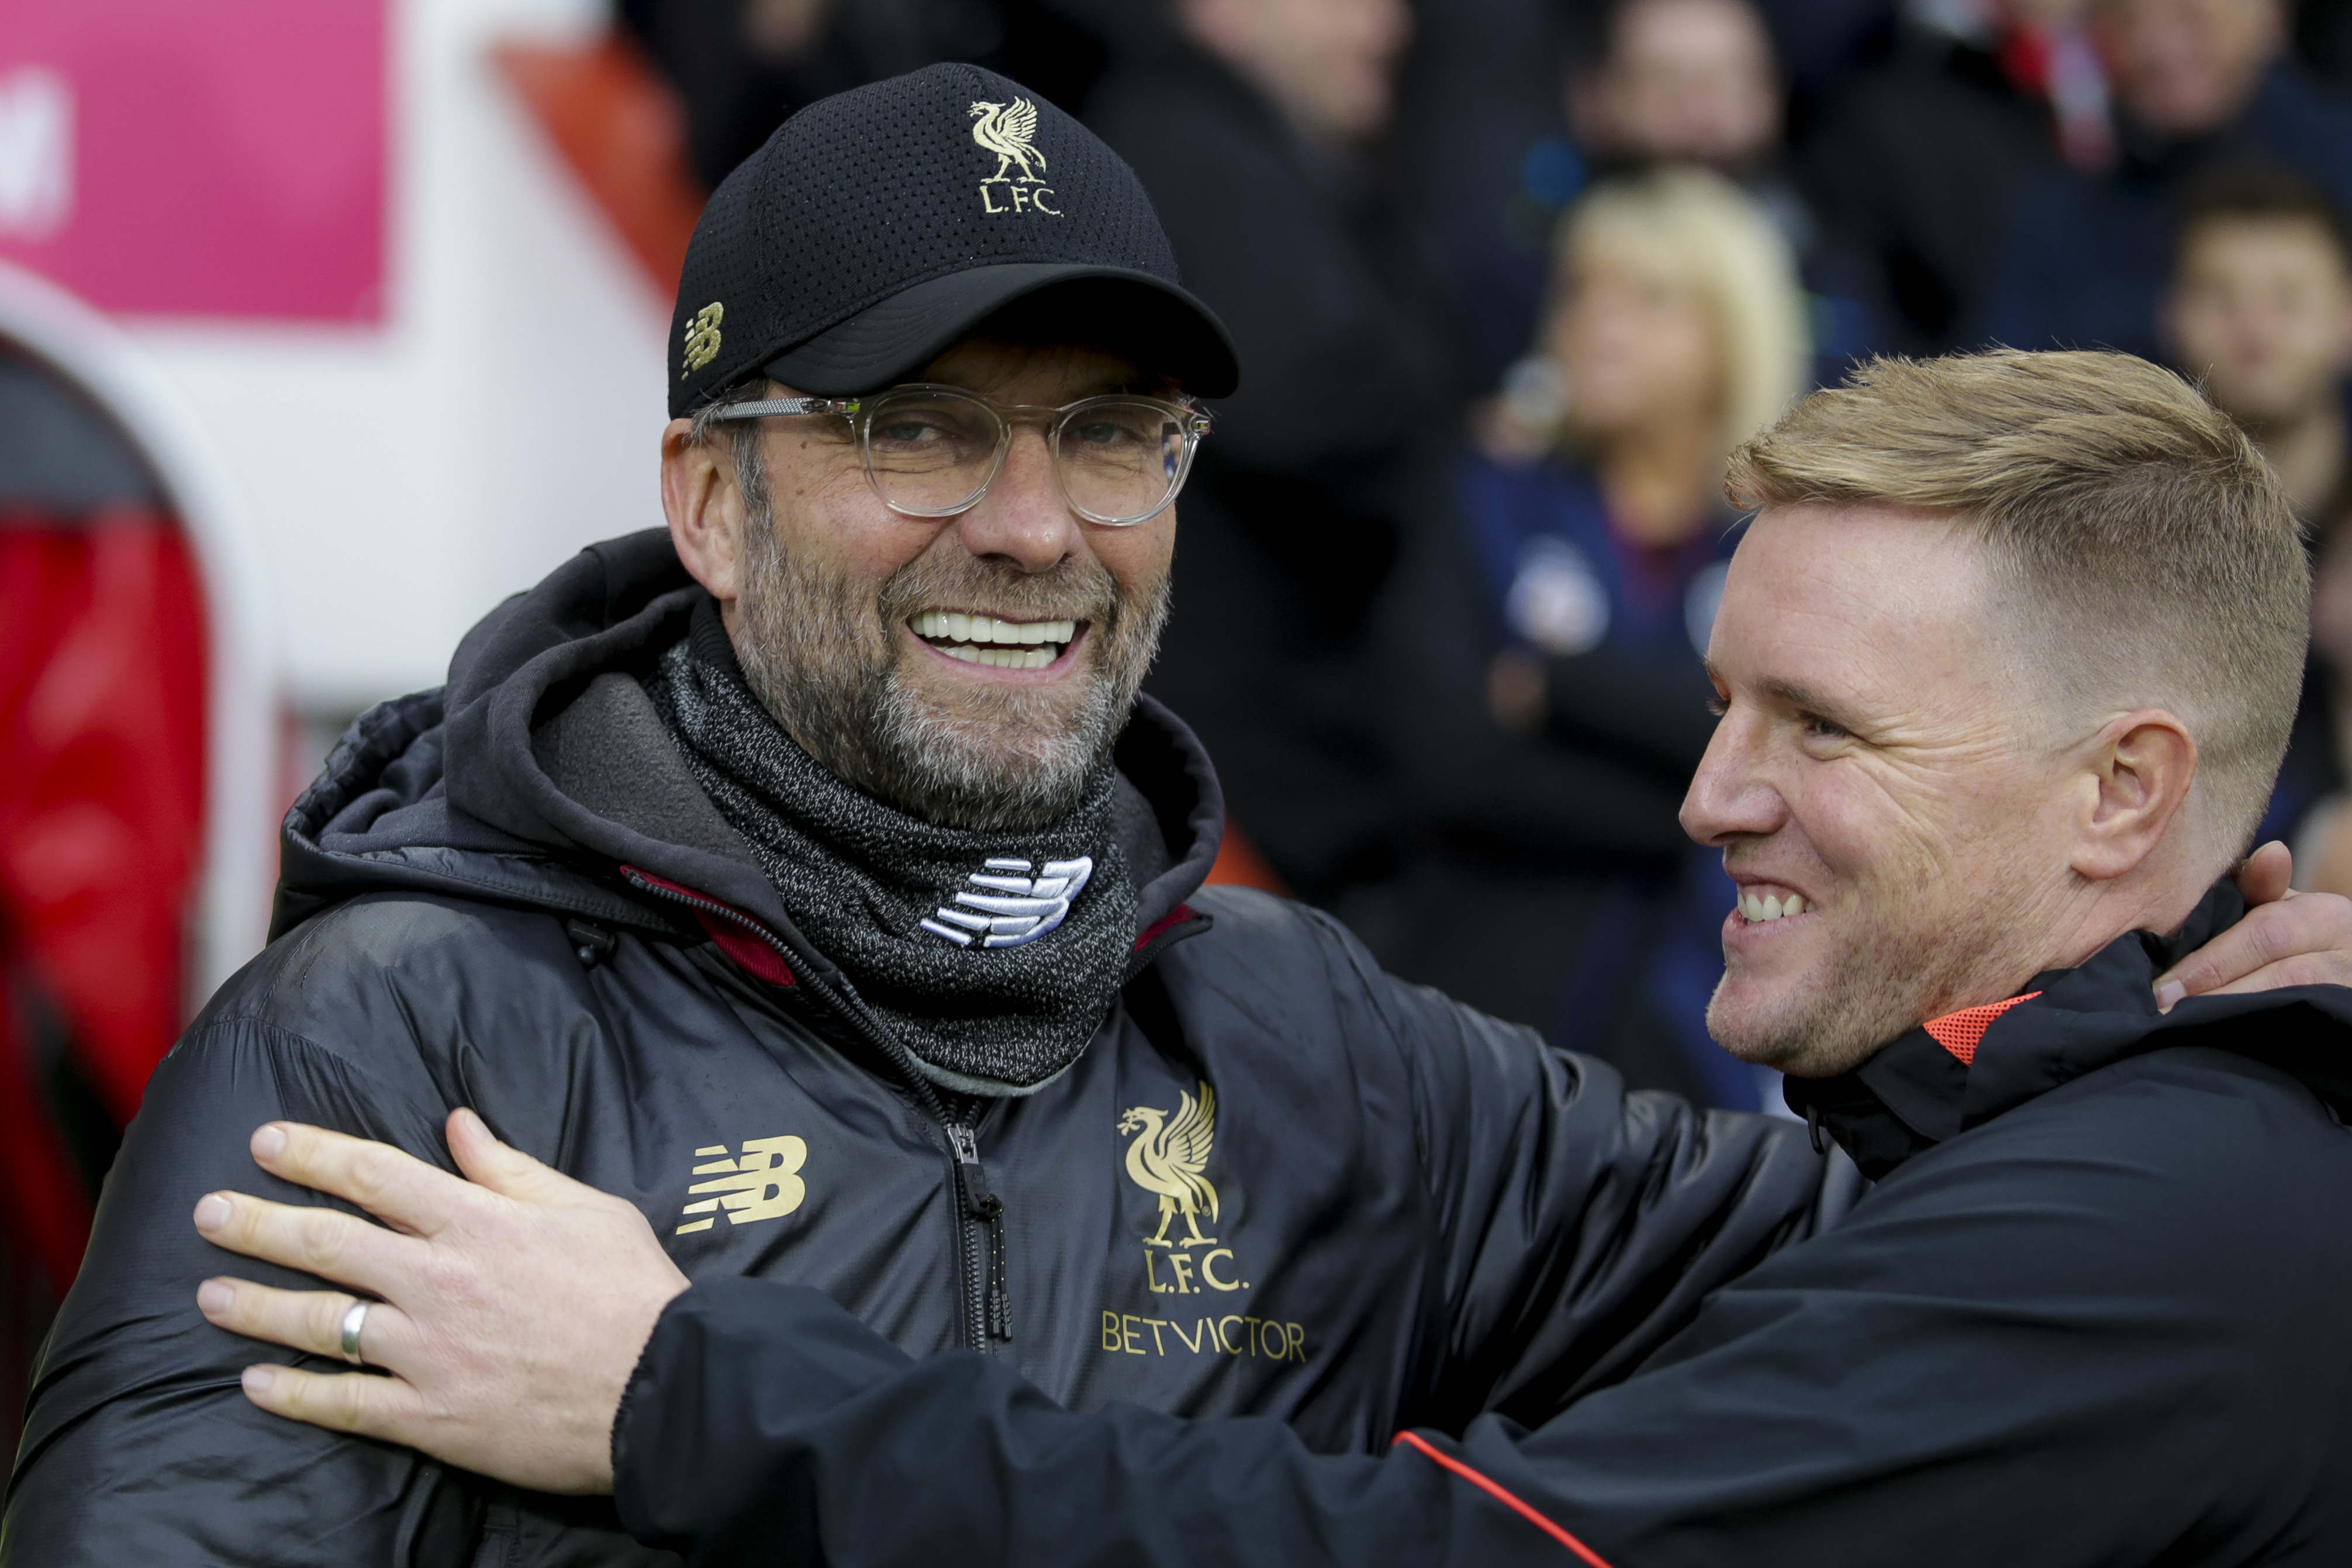 Liverpool manager Jurgen Klopp with then-Bournemouth manager Eddie Howe before the Premier League match between Bournemouth and Liverpool at Vitality Stadium on December 8, 2018 